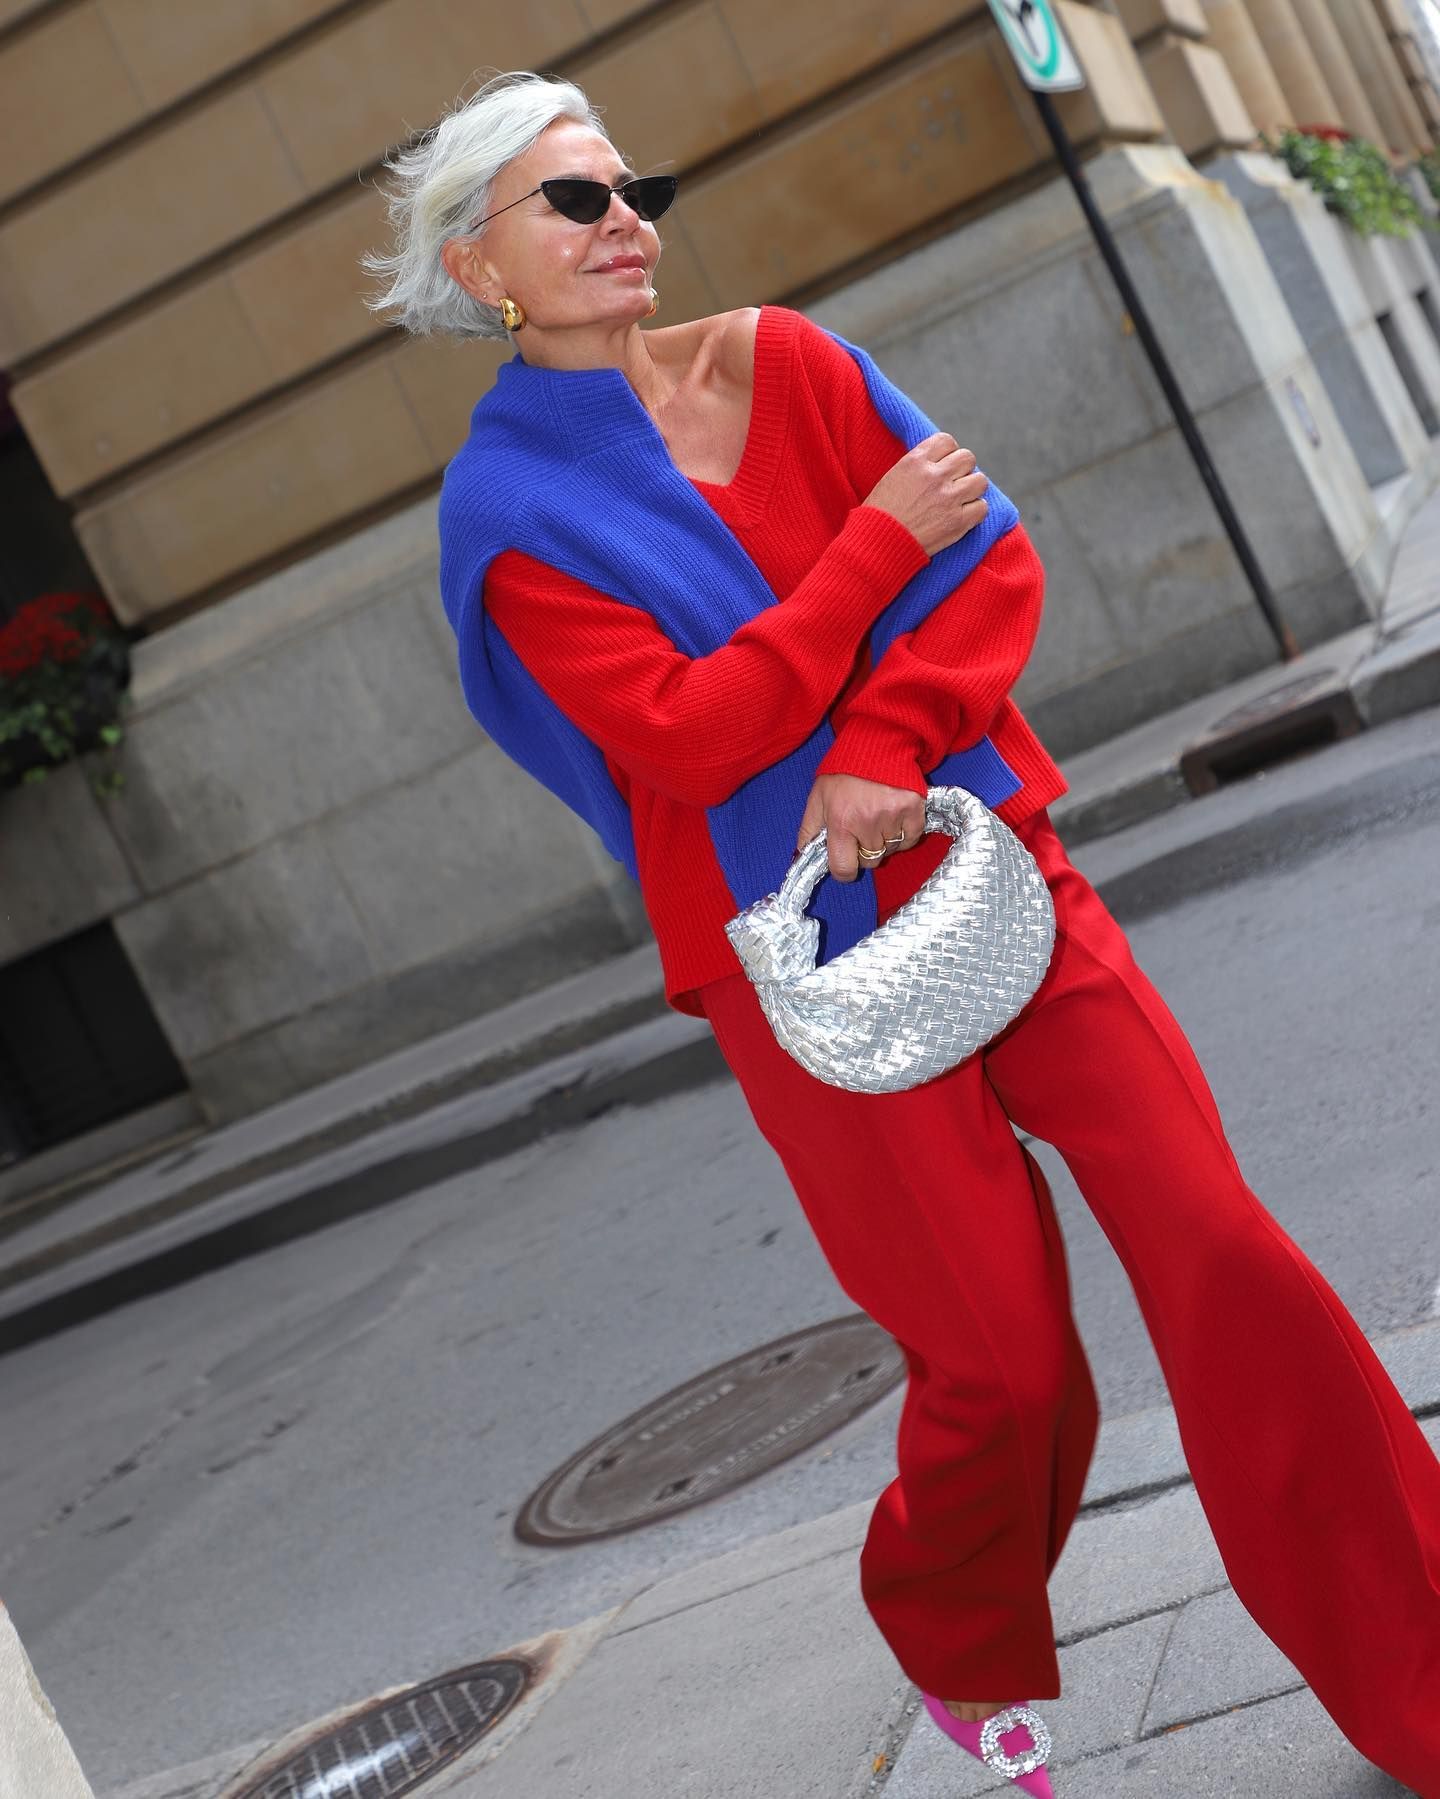 The New Color Trend People Will Wear Instead of Red | Who What Wear